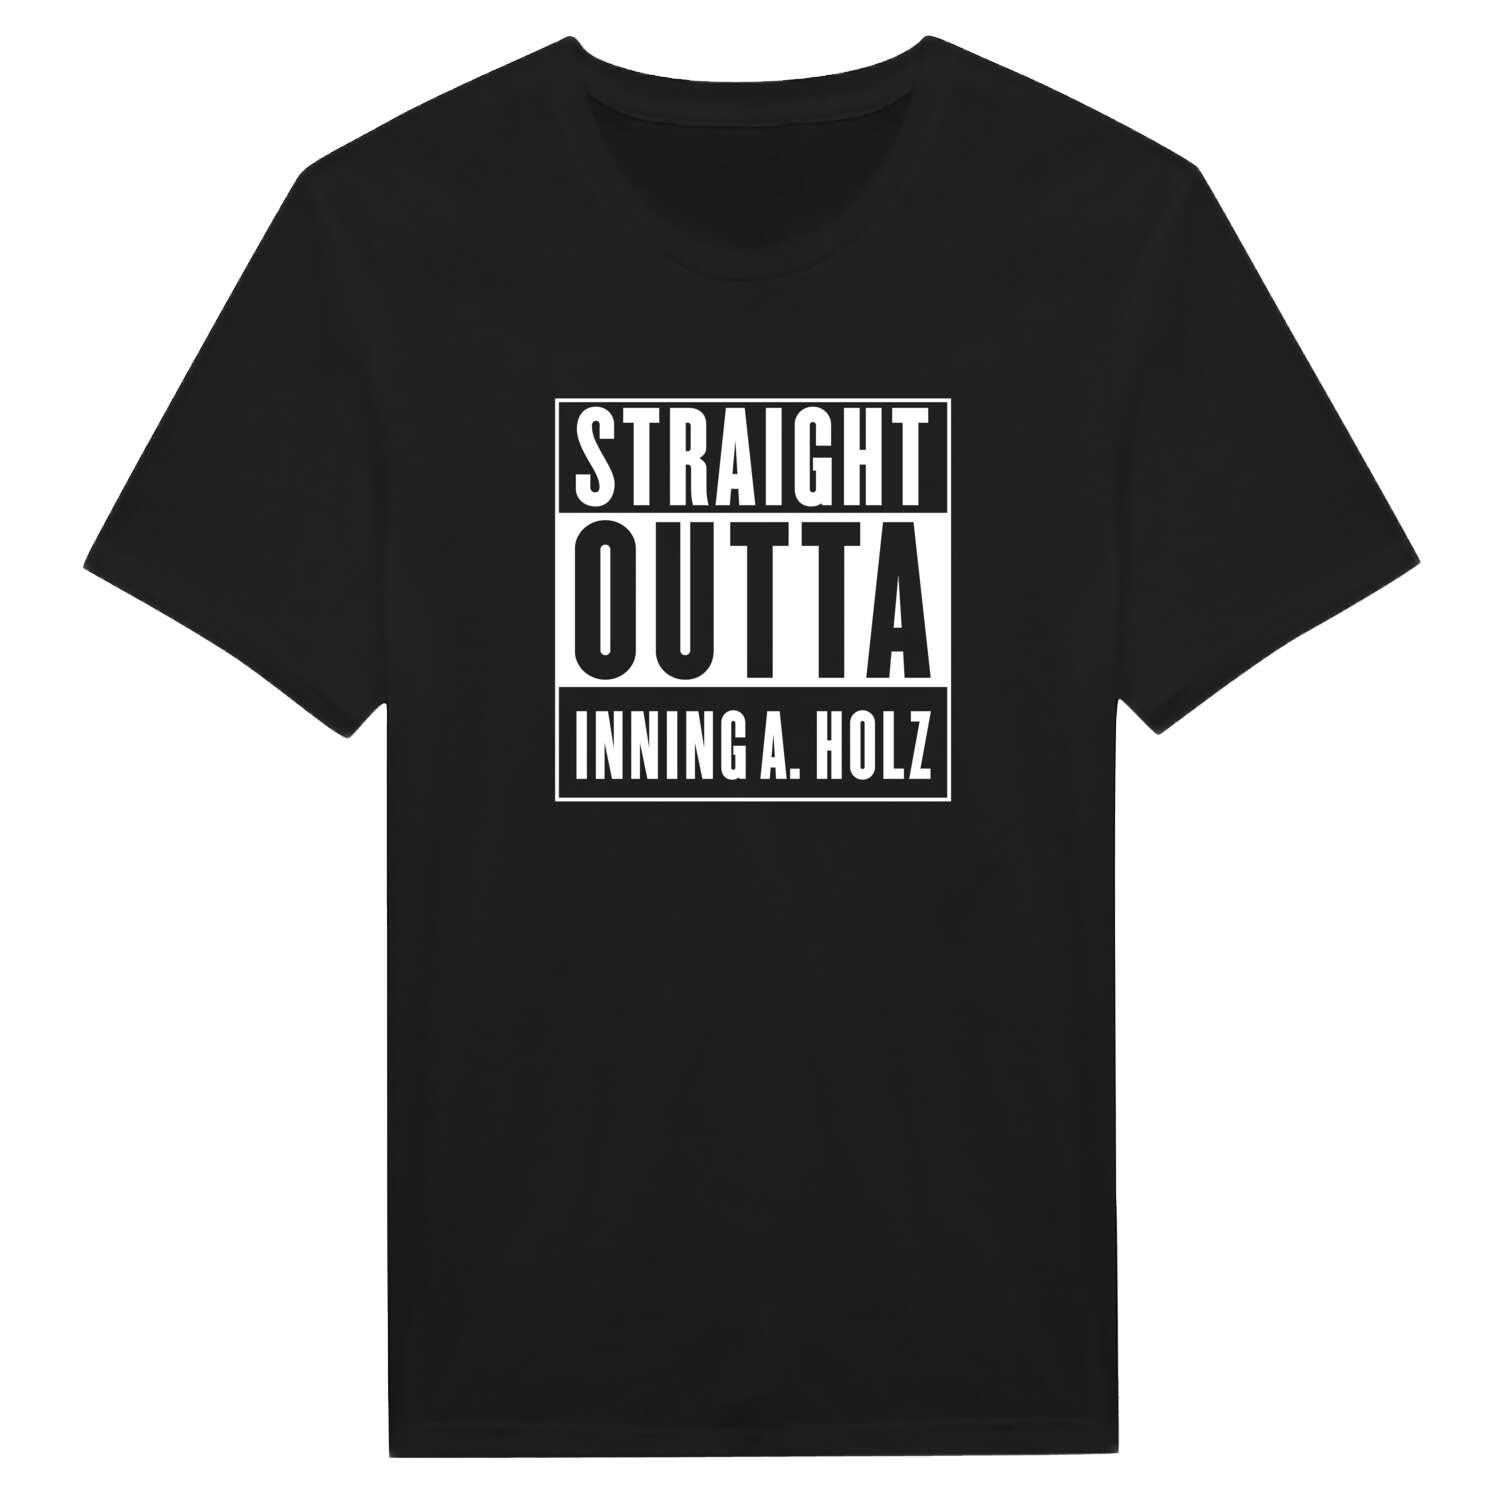 Inning a. Holz T-Shirt »Straight Outta«